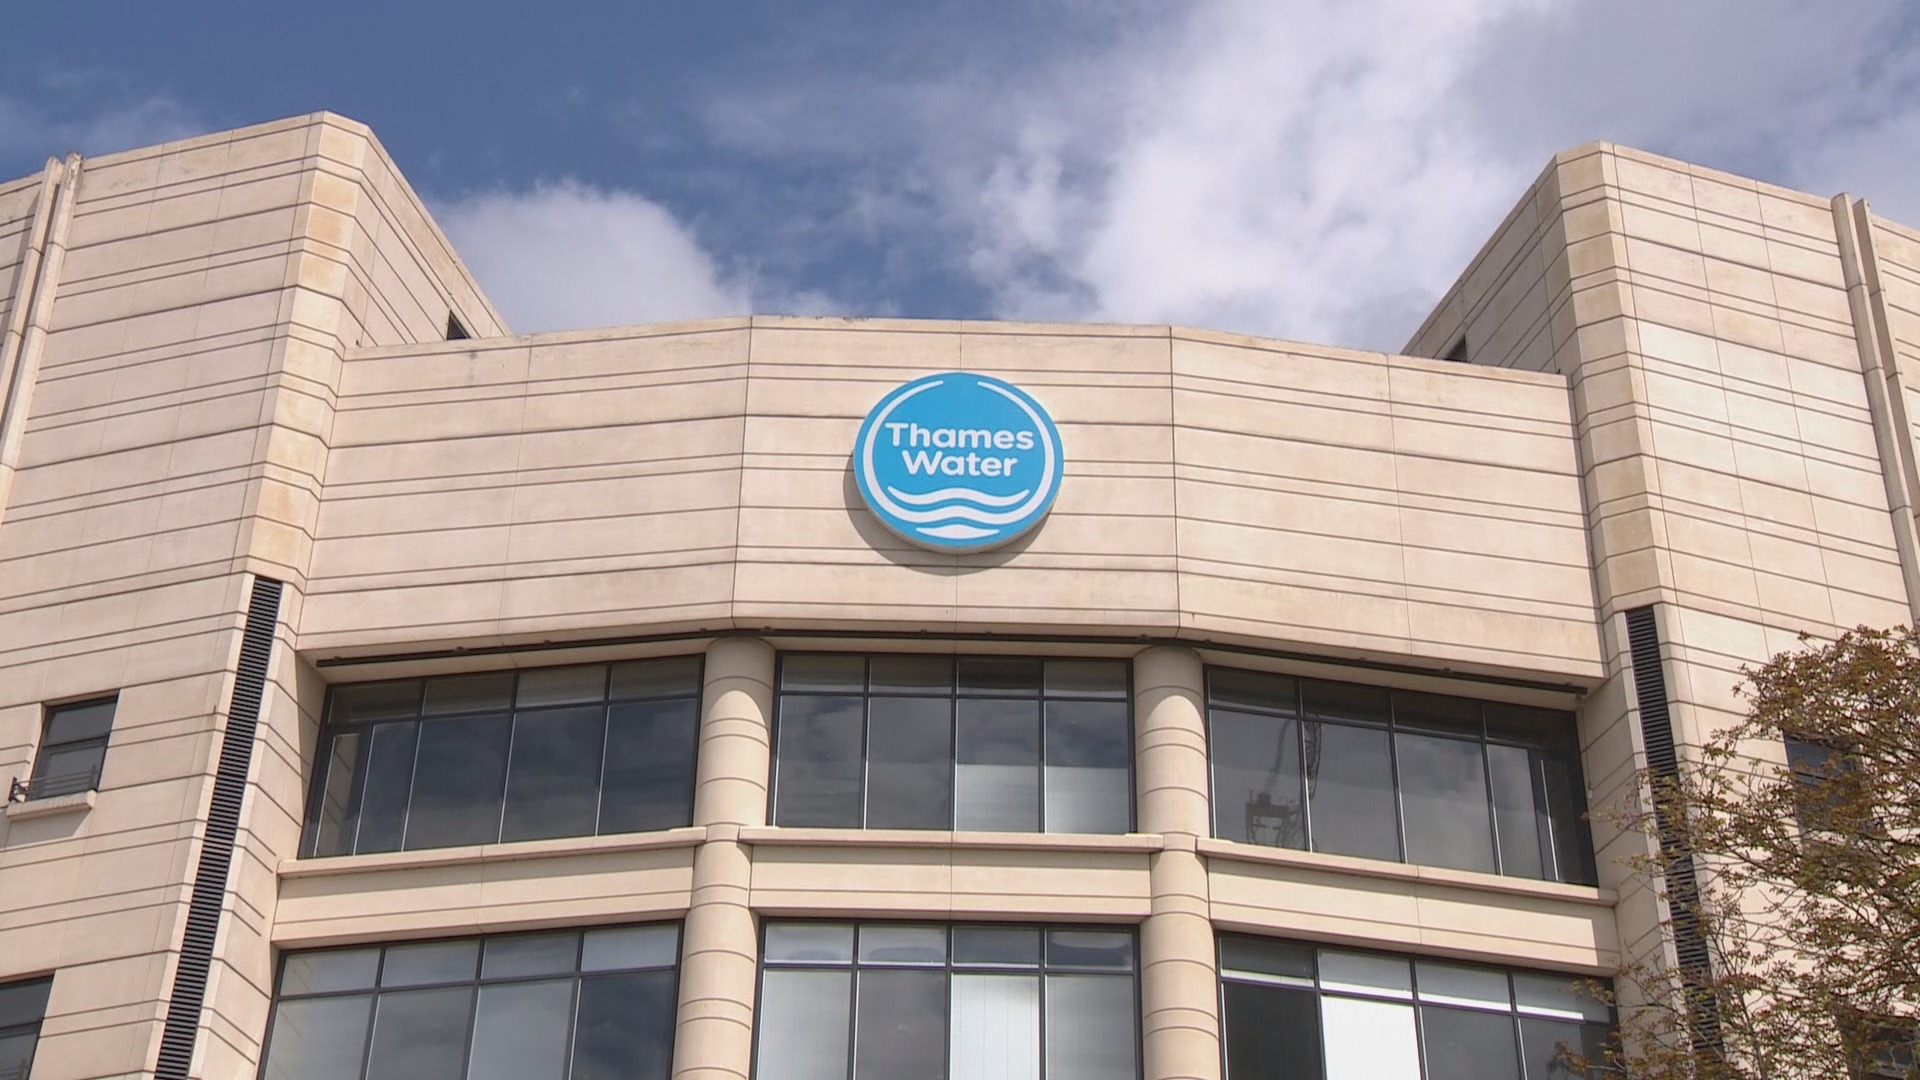 chief-executive-of-reading-based-thames-water-to-step-down-with